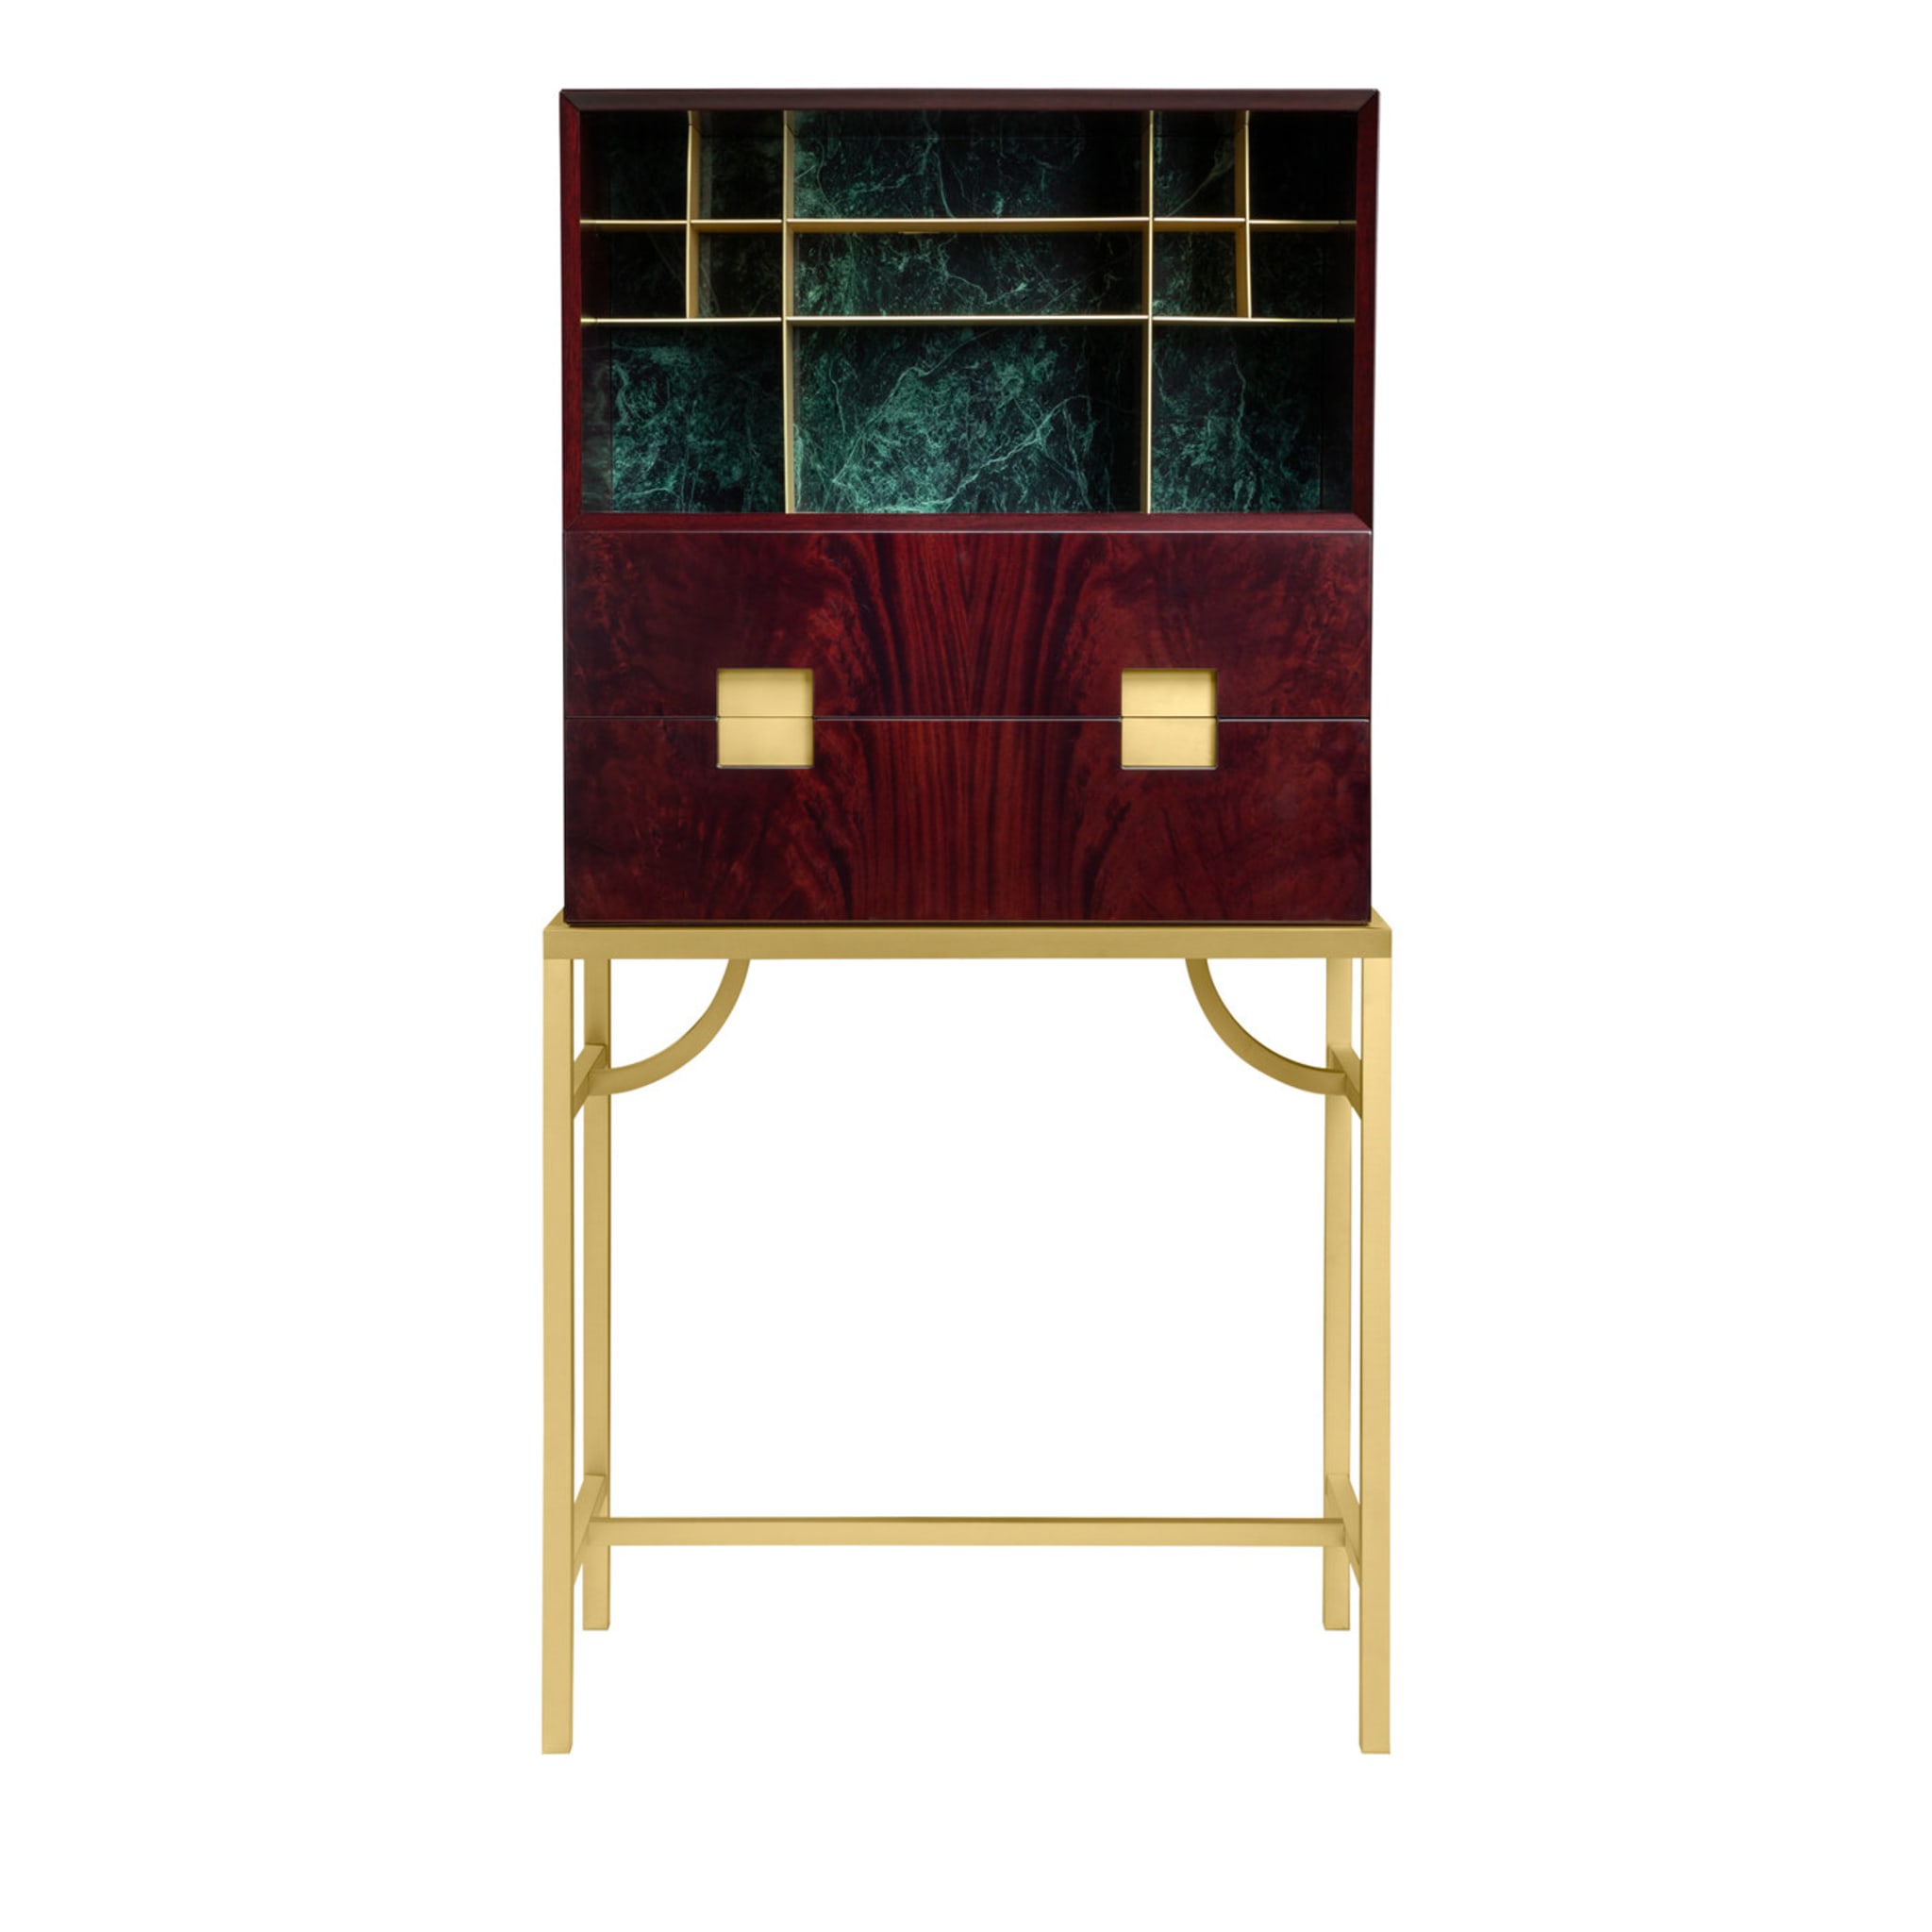 Zuan Mahogany and Verde Alpi Marble Bar Cabinet by Paolo Rizzatto - Main view